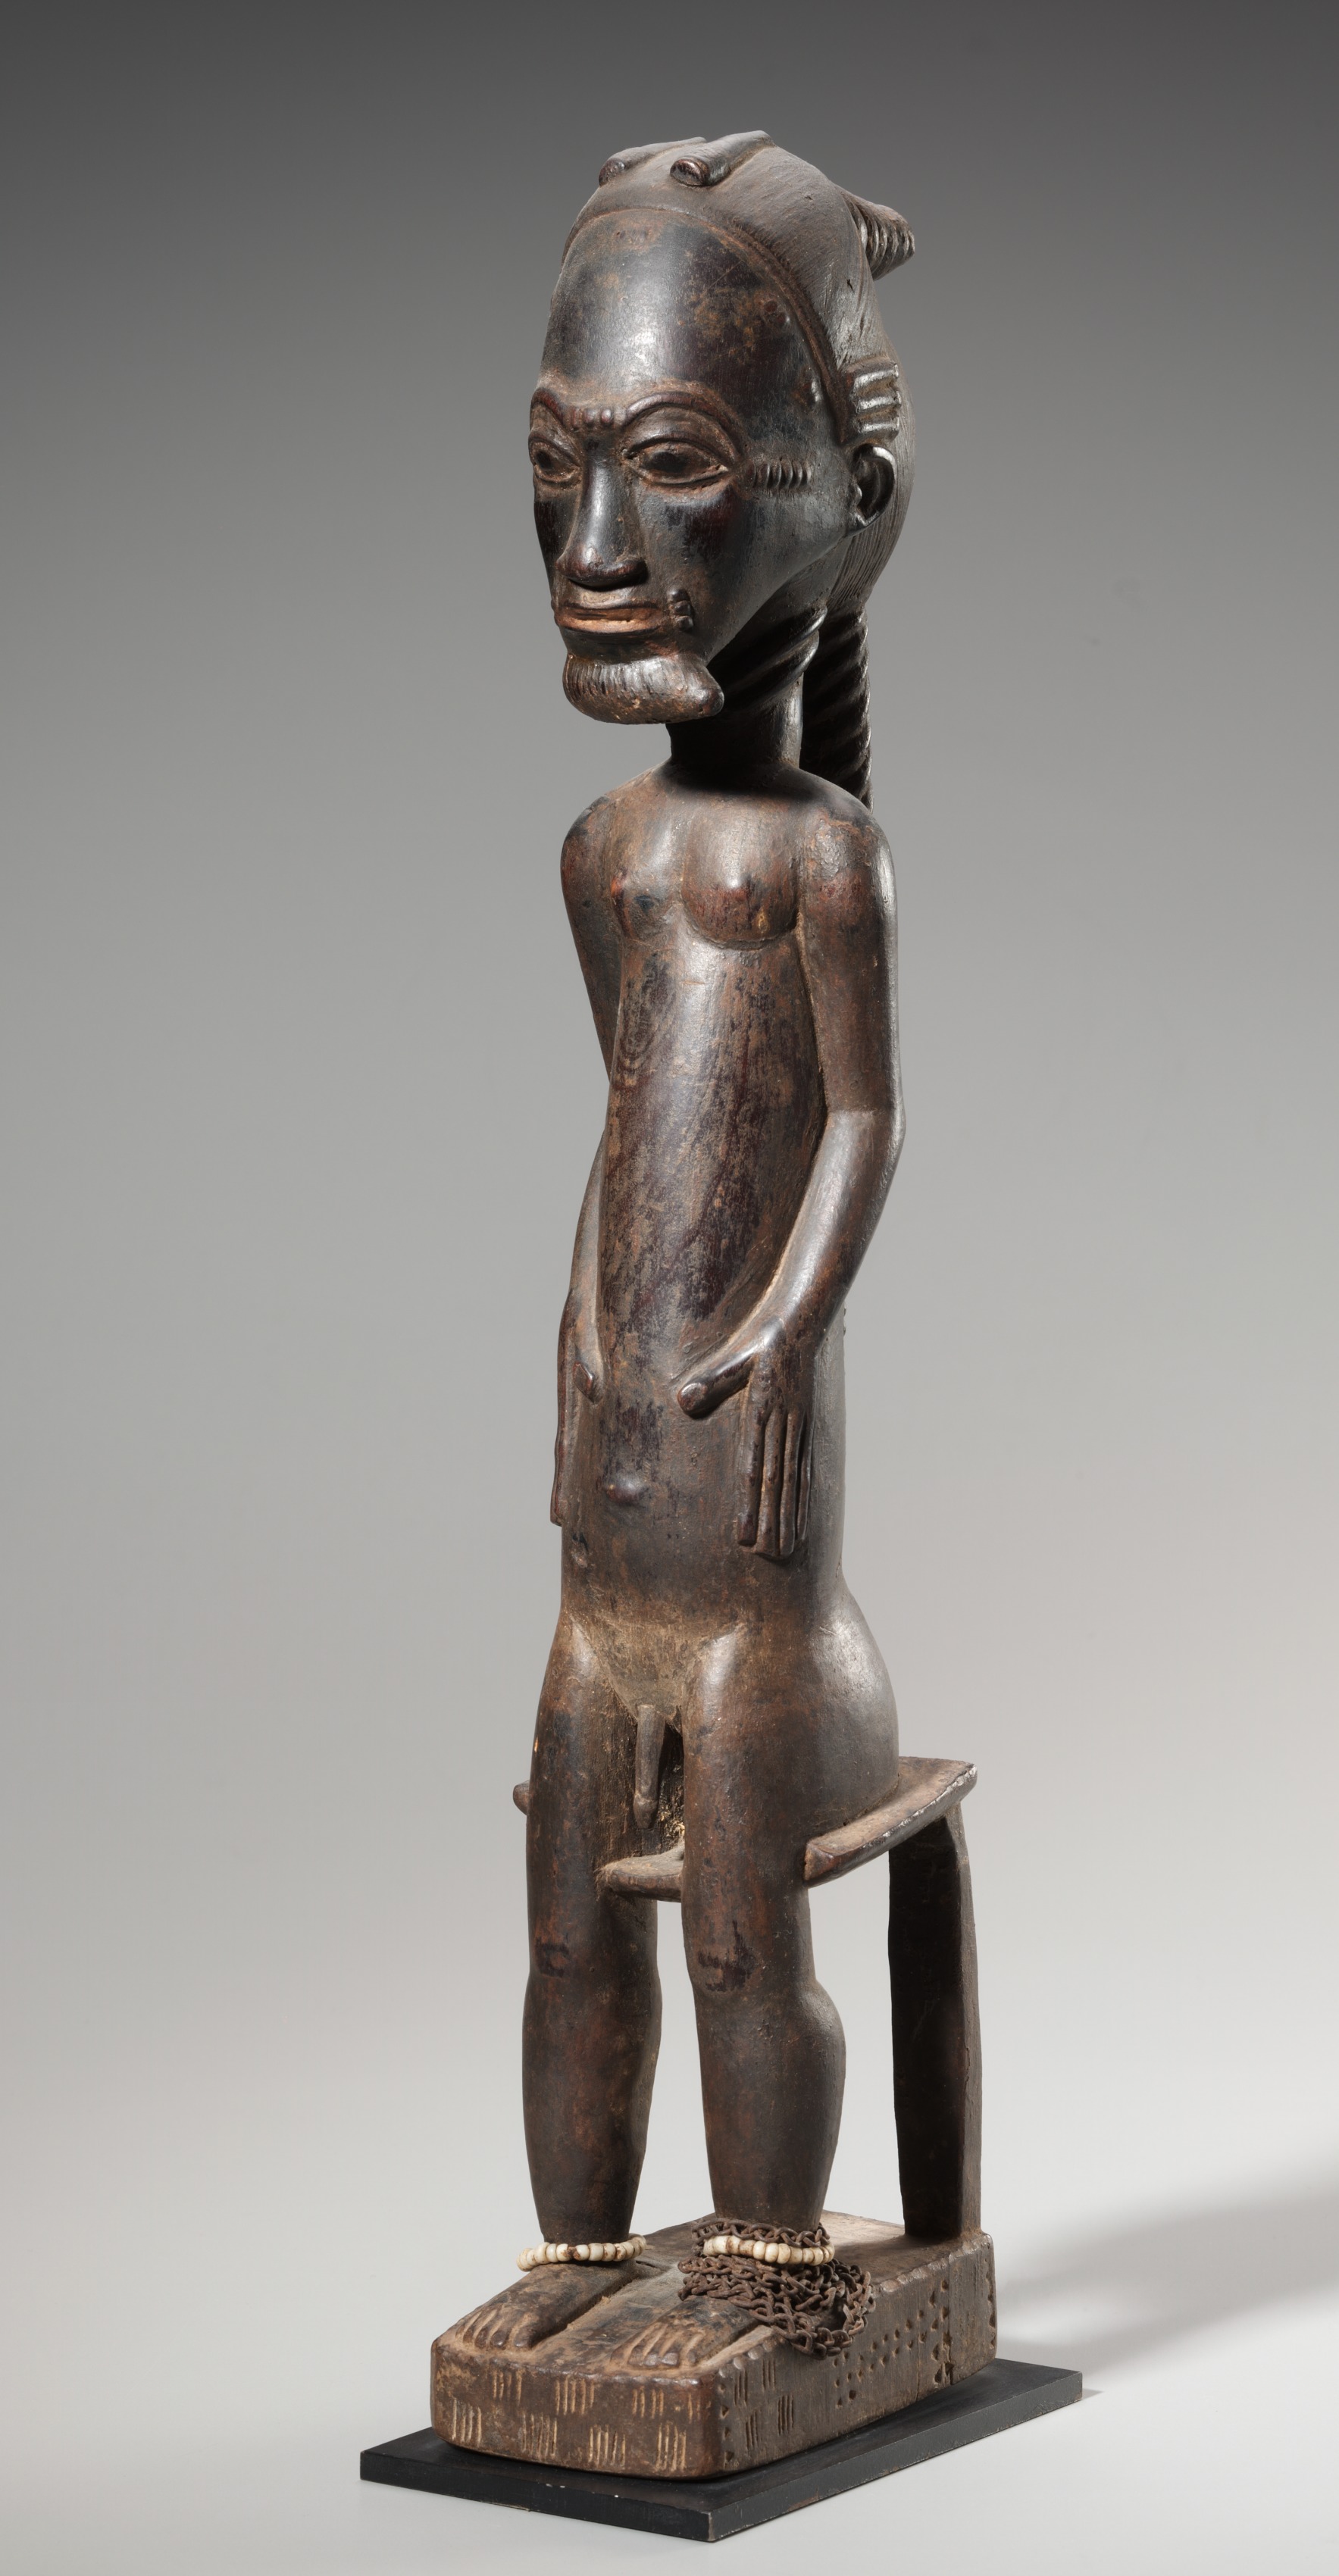 Male Figure from a Pair (asye usu)